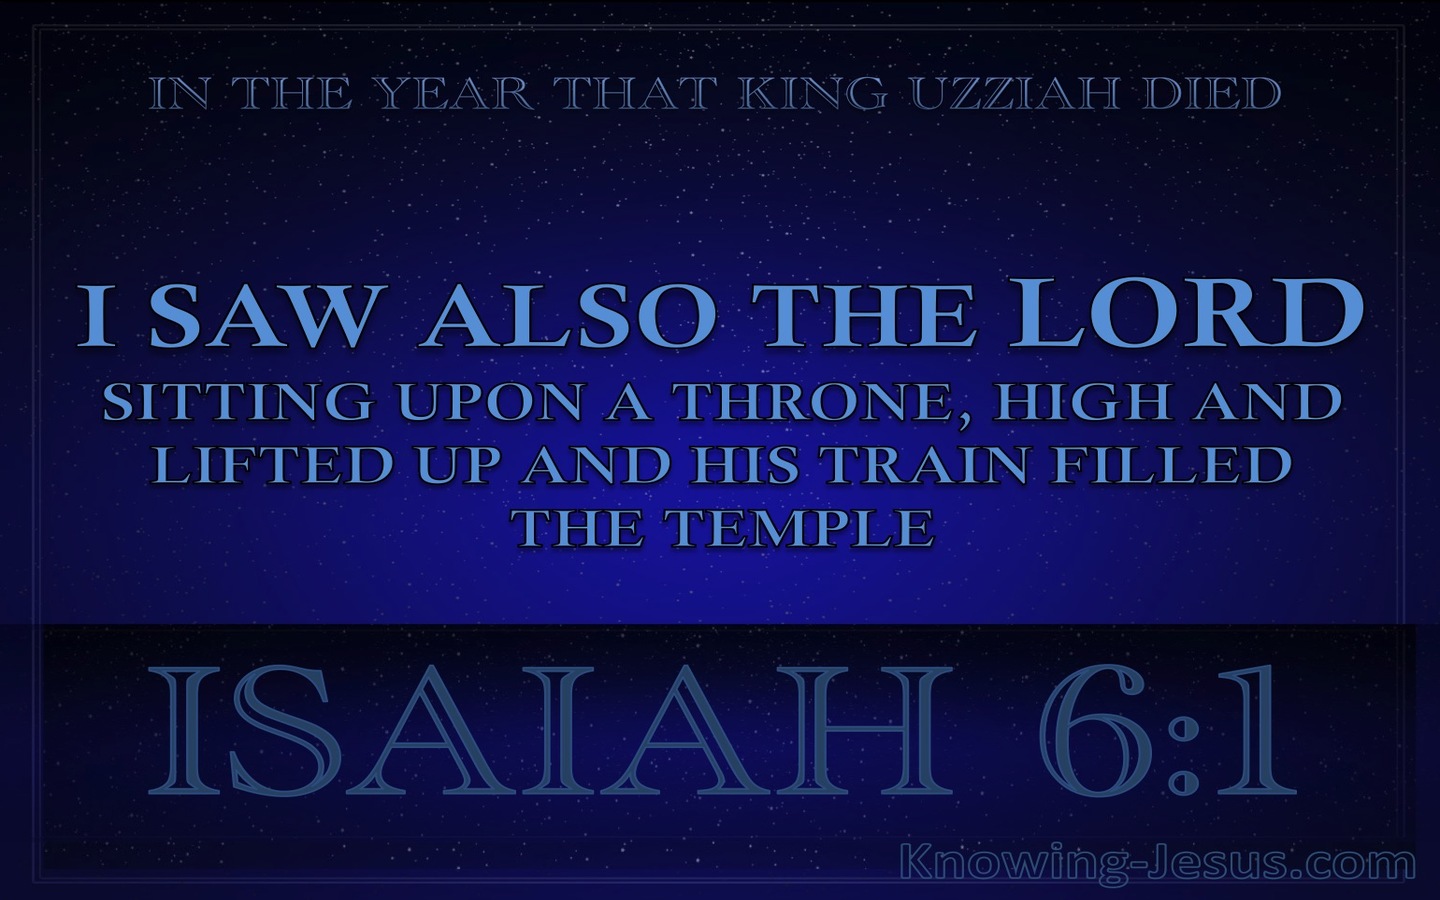 Isaiah 6:1 The Lord Sitting Upon A Throne (blue)